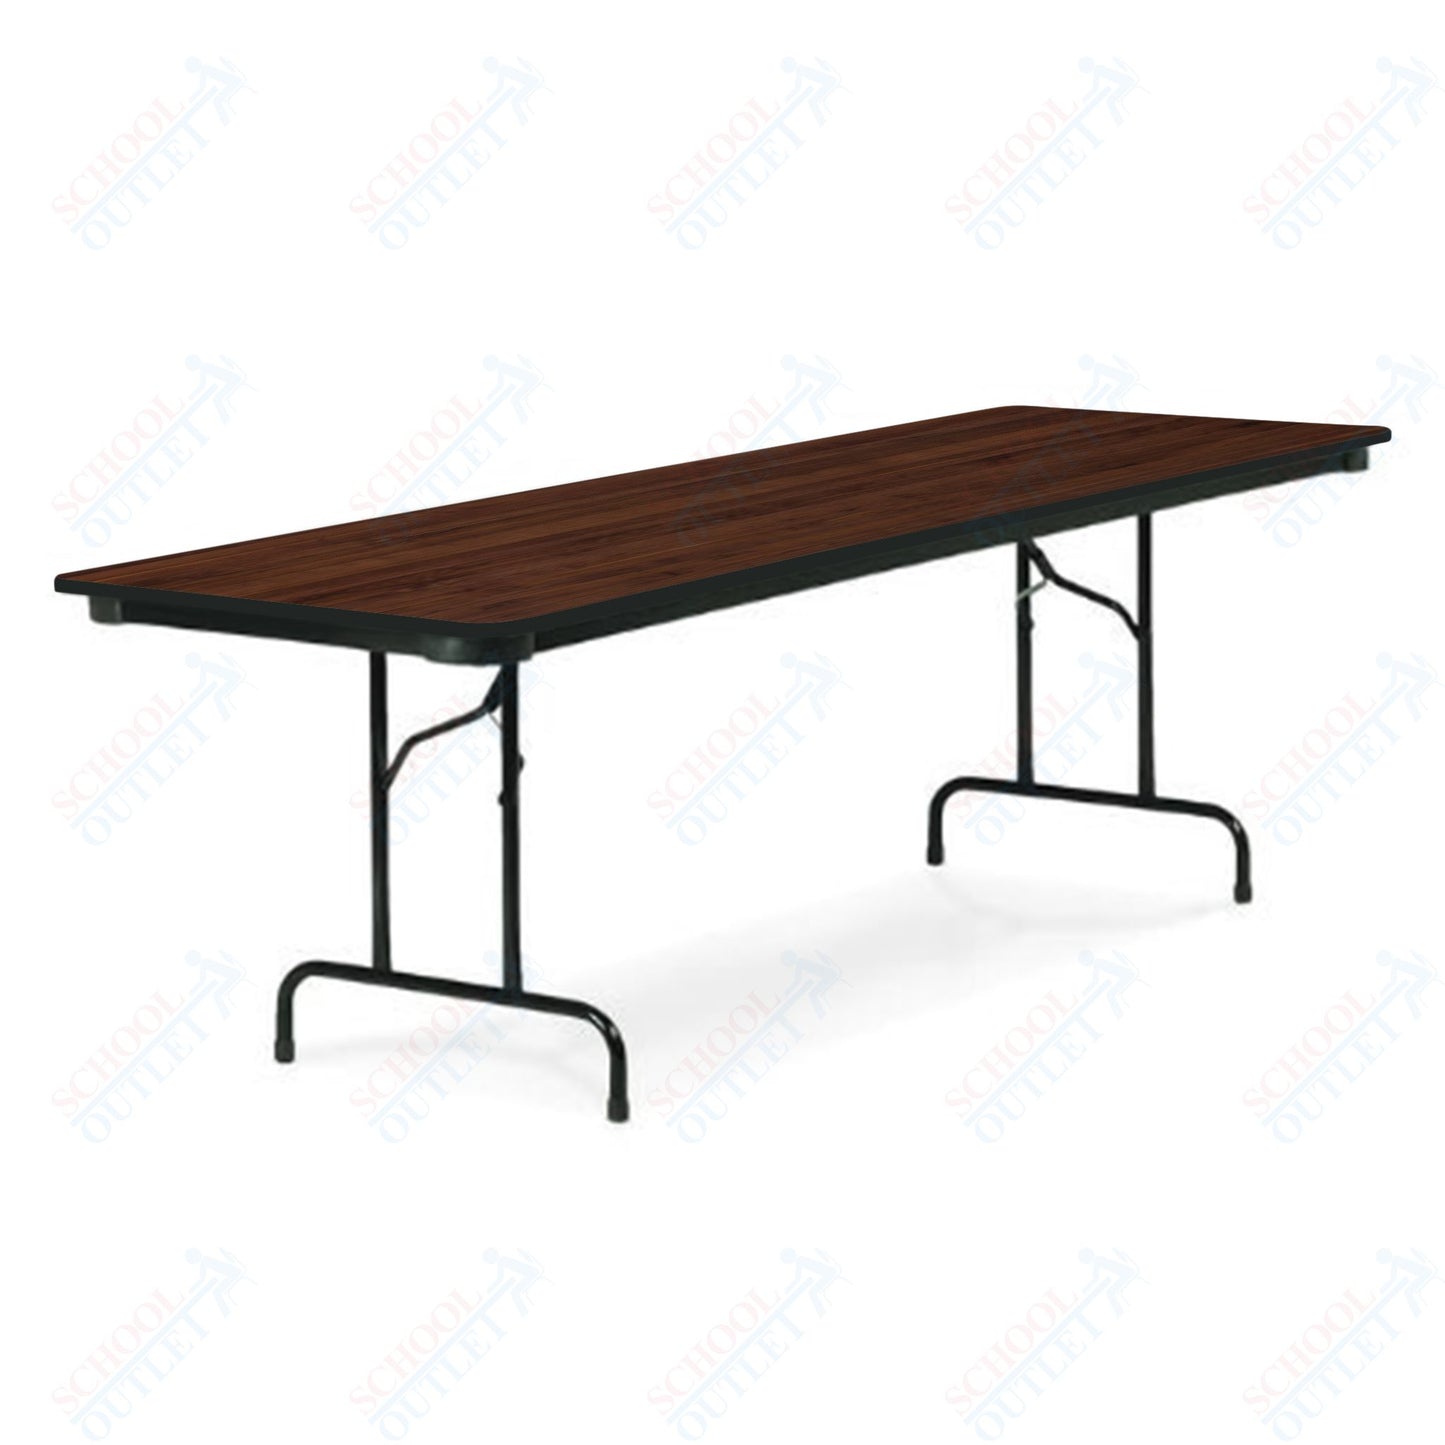 Virco 603696 - 6000 series 3/4" thick particle board folding table 36"W x 96"L x 29"H